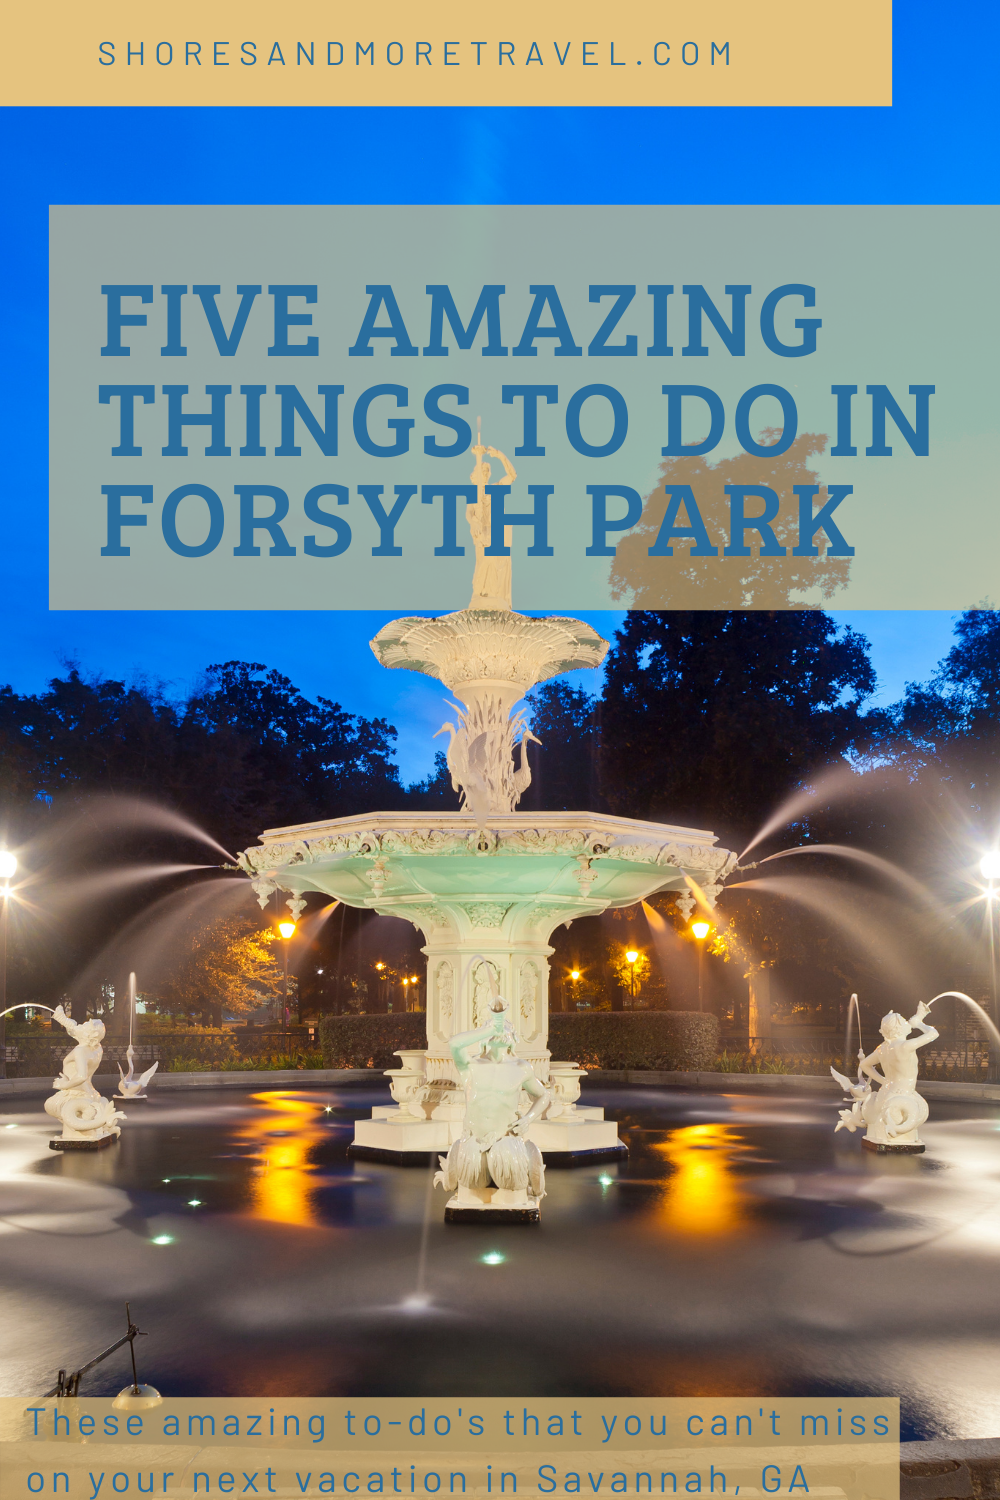 Five amazing Things to do in Forsyth Park on your next Savannah GA vacation